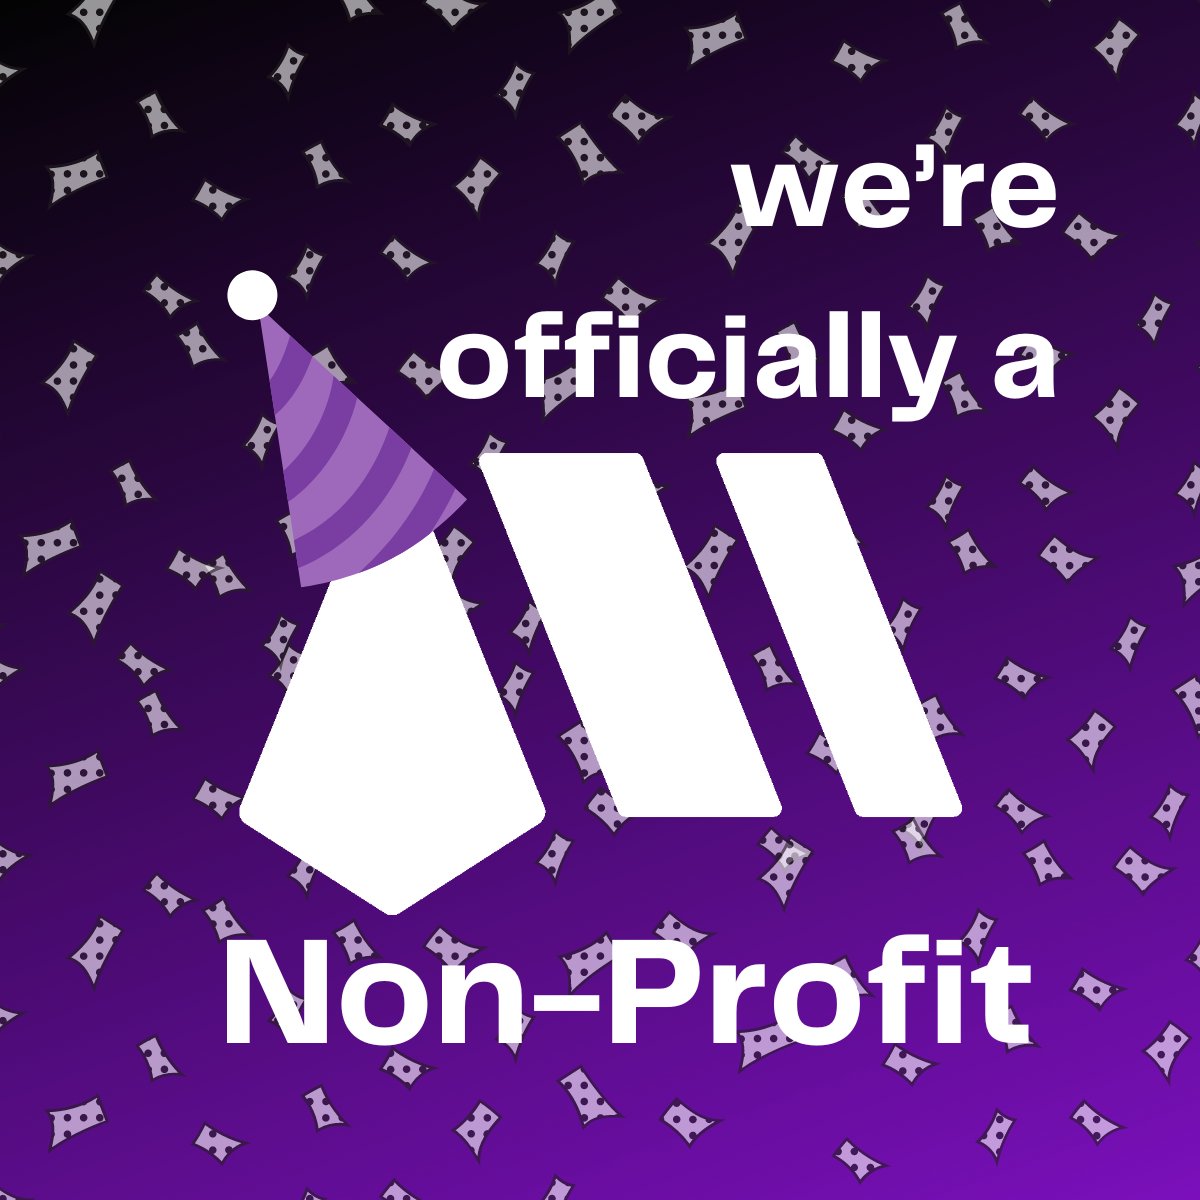 🎉 We're happy to announce that as of last week, we've officially become a non-profit organization based in Germany! 🇩🇪🌍 📰 We shared this and more in our second newsletter of the year. Want to stay updated on all things dm3 protocol, including what’s happening now and what’s…